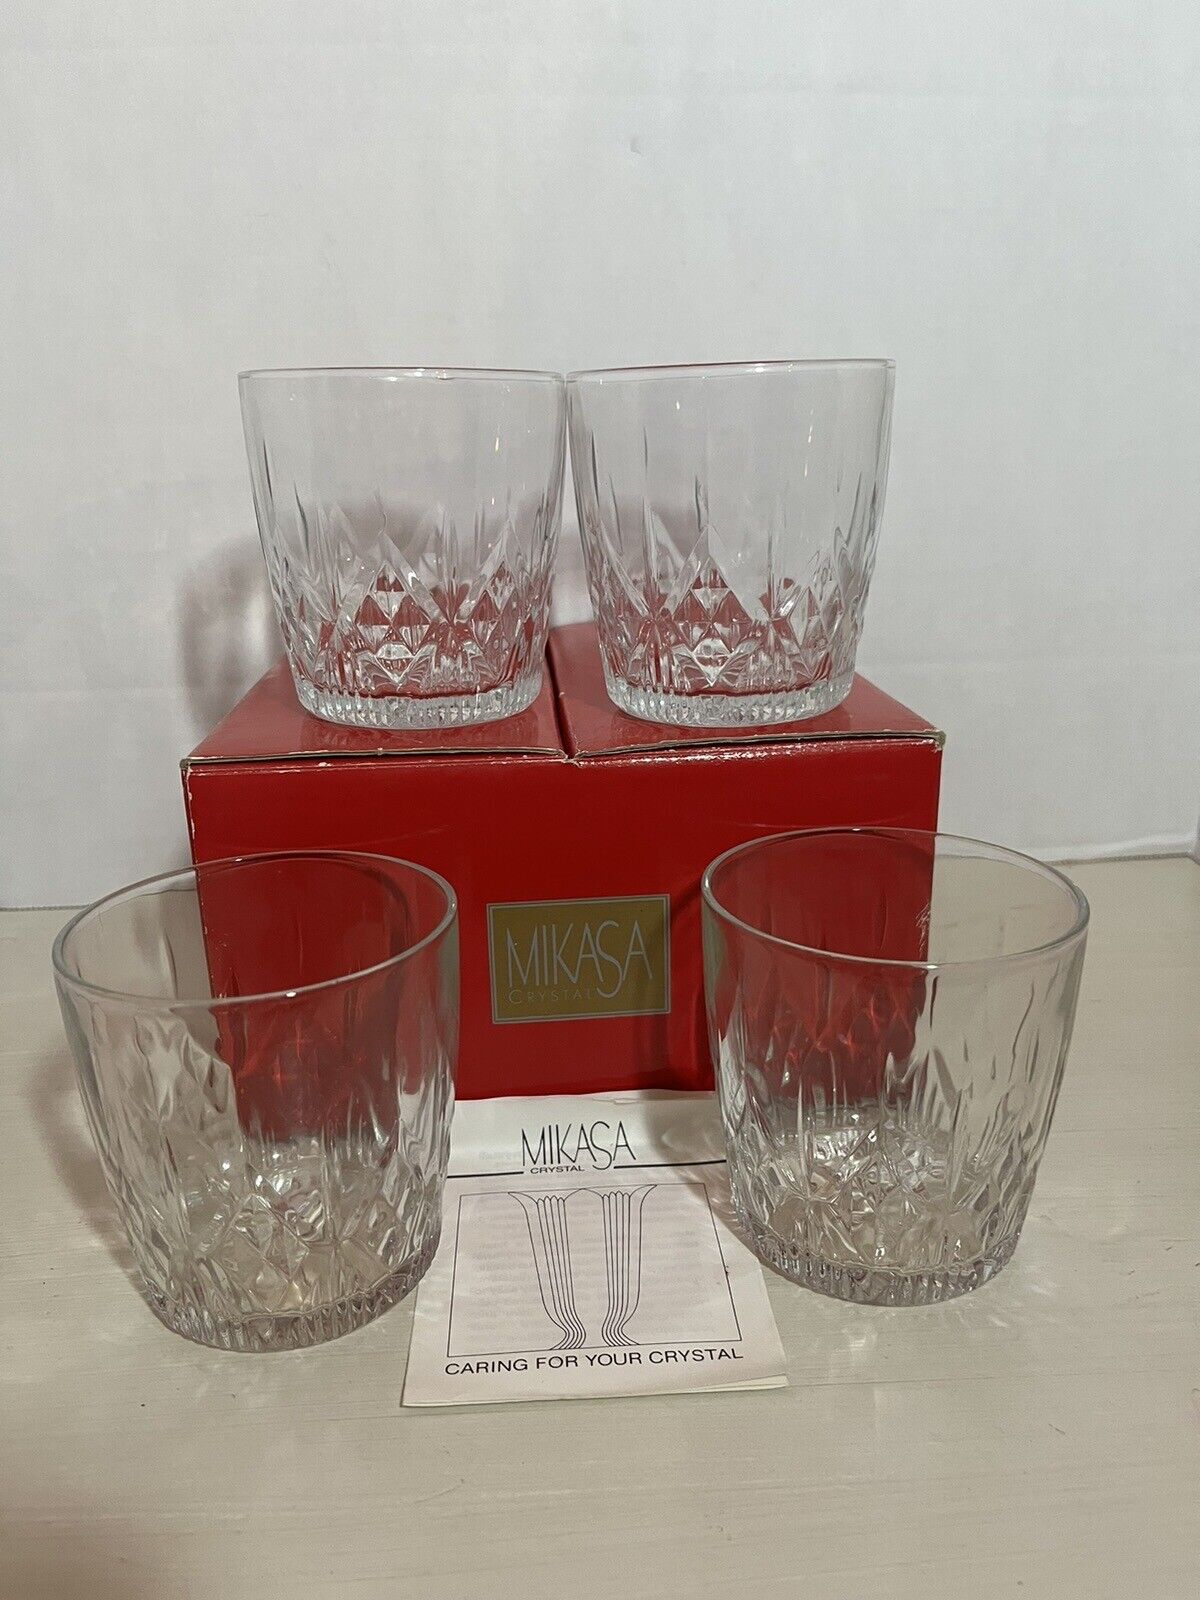 Mikasa Crystal Pattern Discontinued 4 Old Fashioned Barware Old Fashioned?